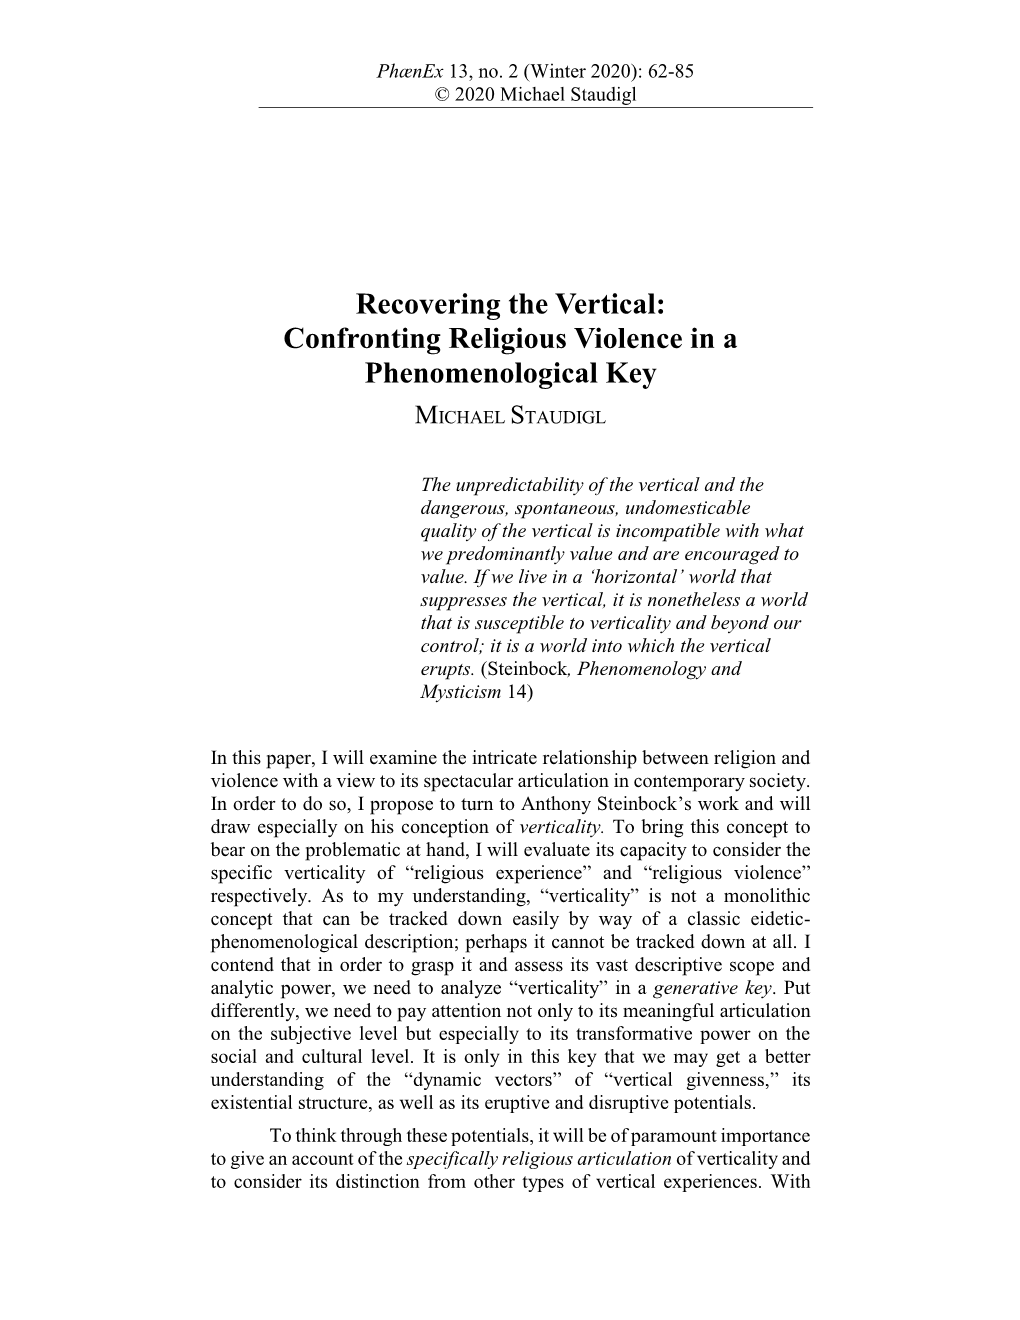 Confronting Religious Violence in a Phenomenological Key MICHAEL STAUDIGL